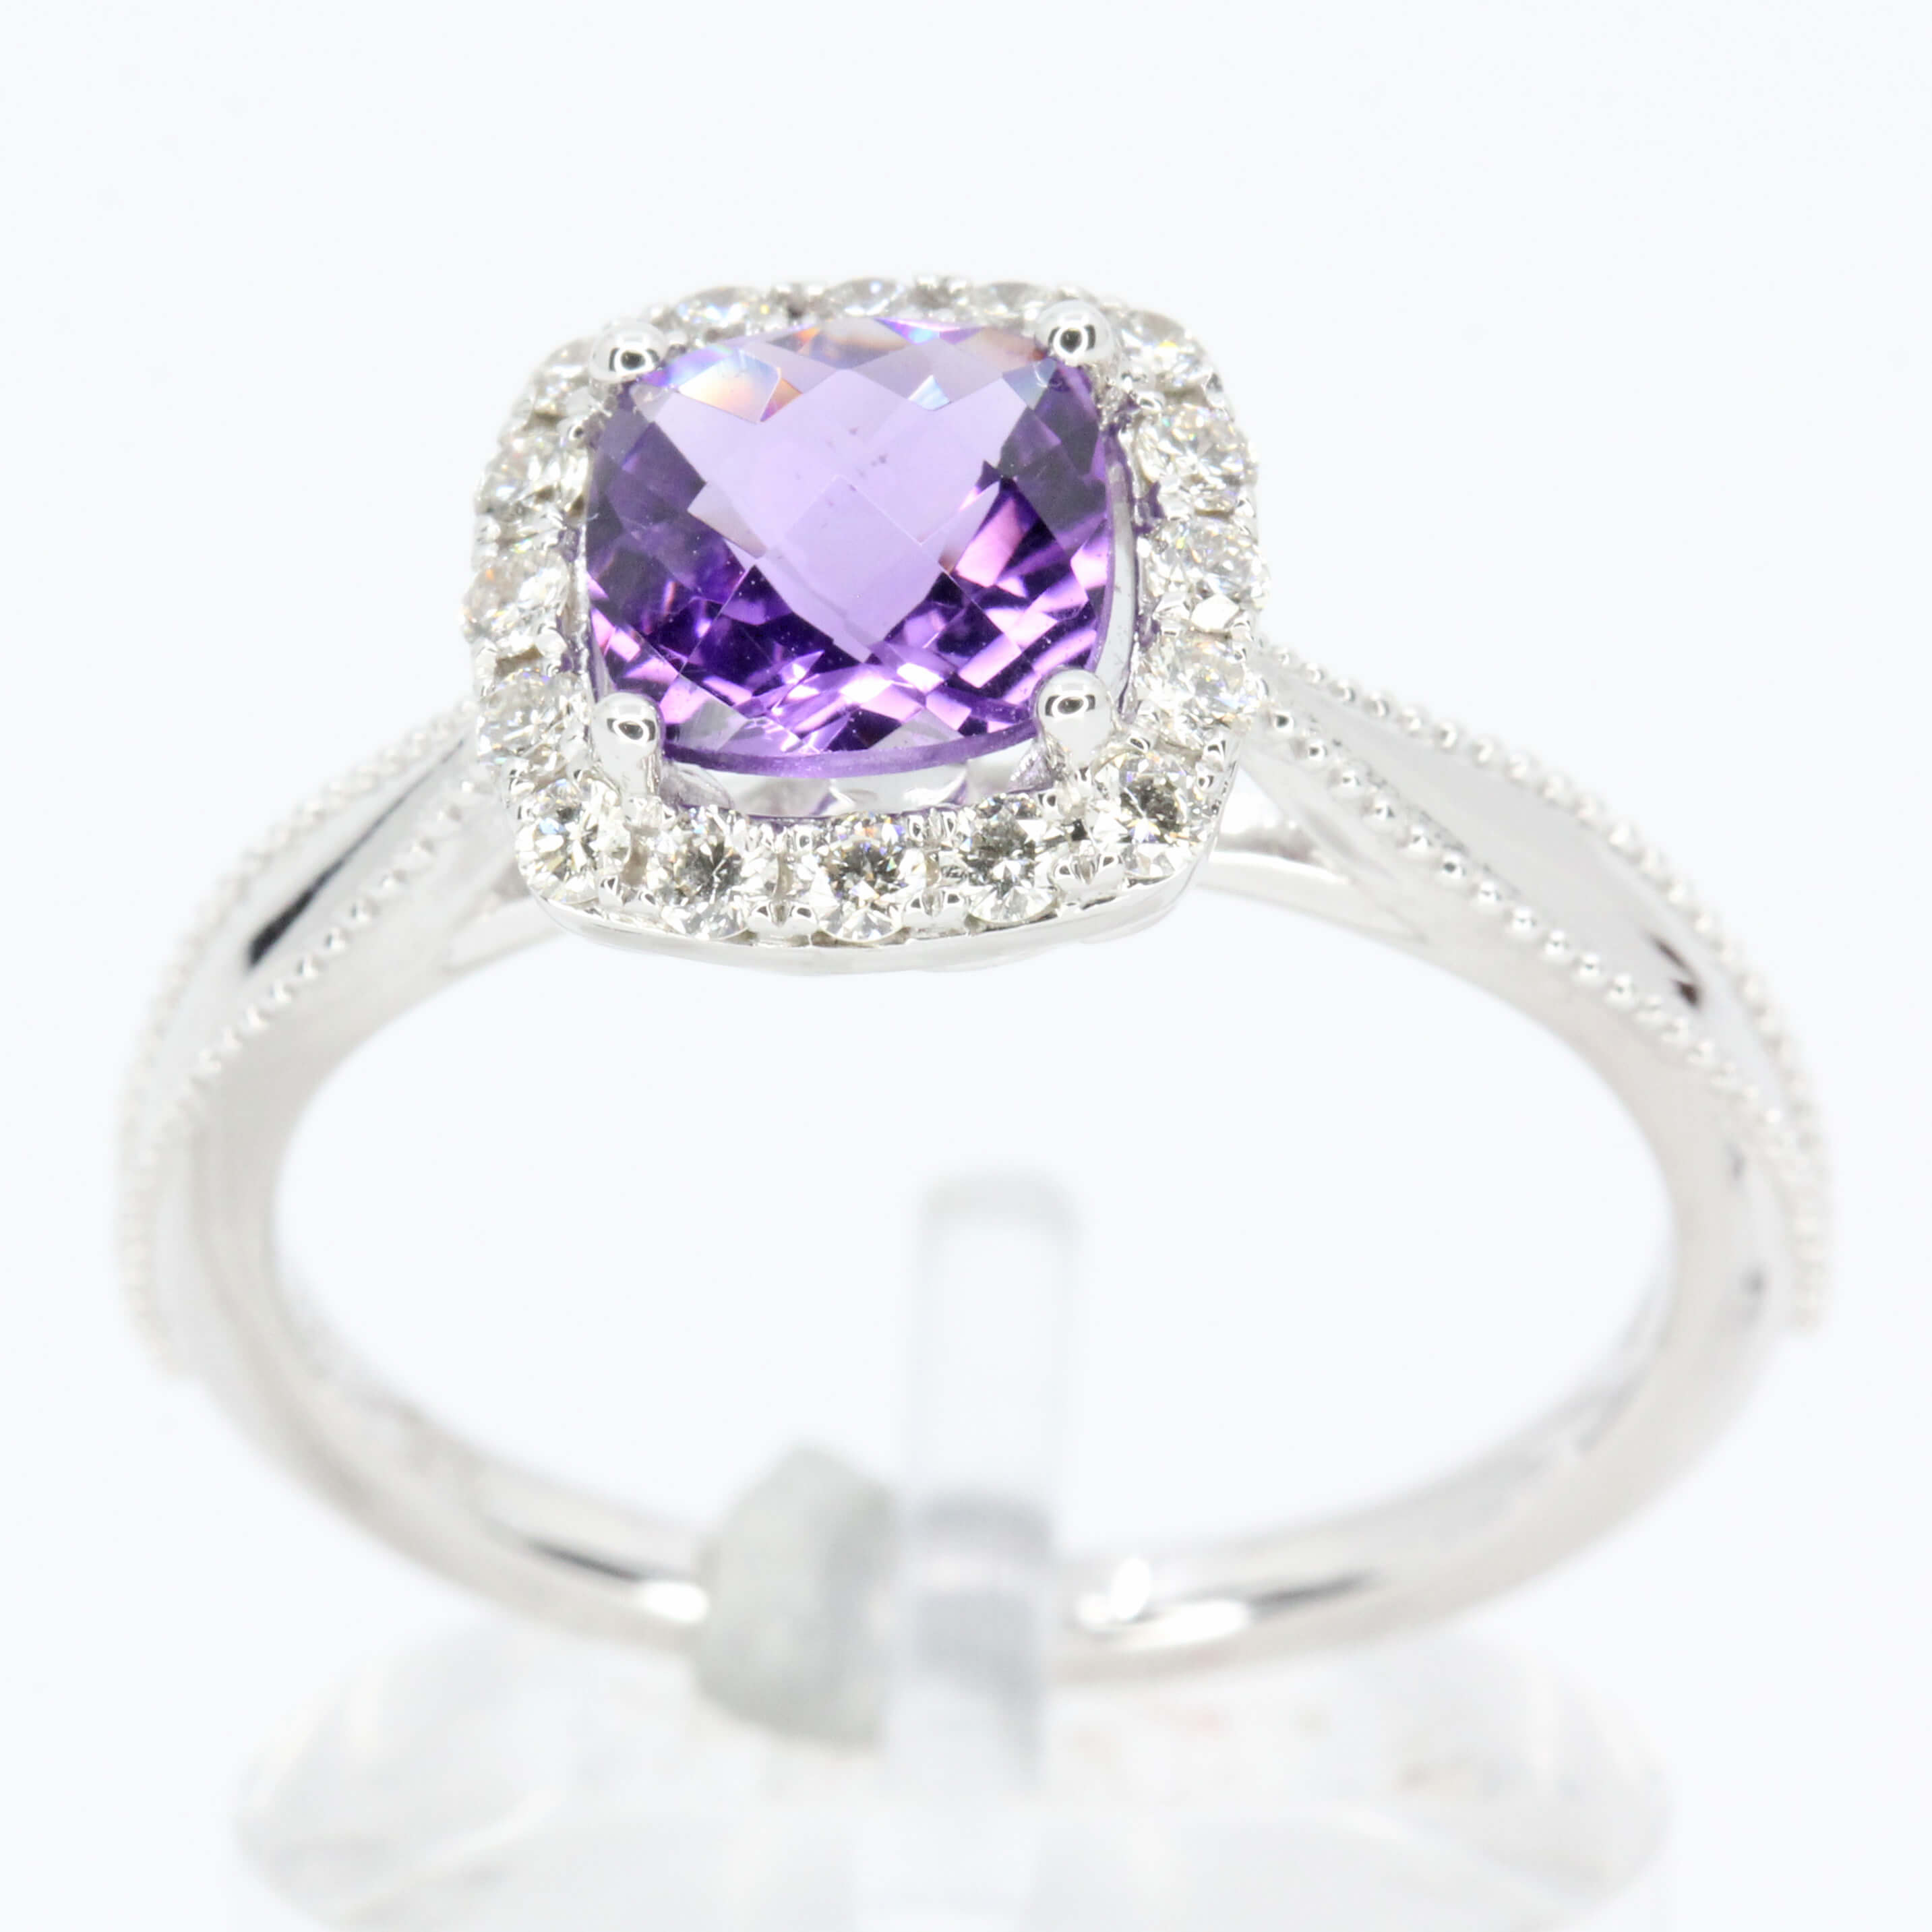 18ct White Gold Amethyst and Diamonds Ring | Allgem Jewellers